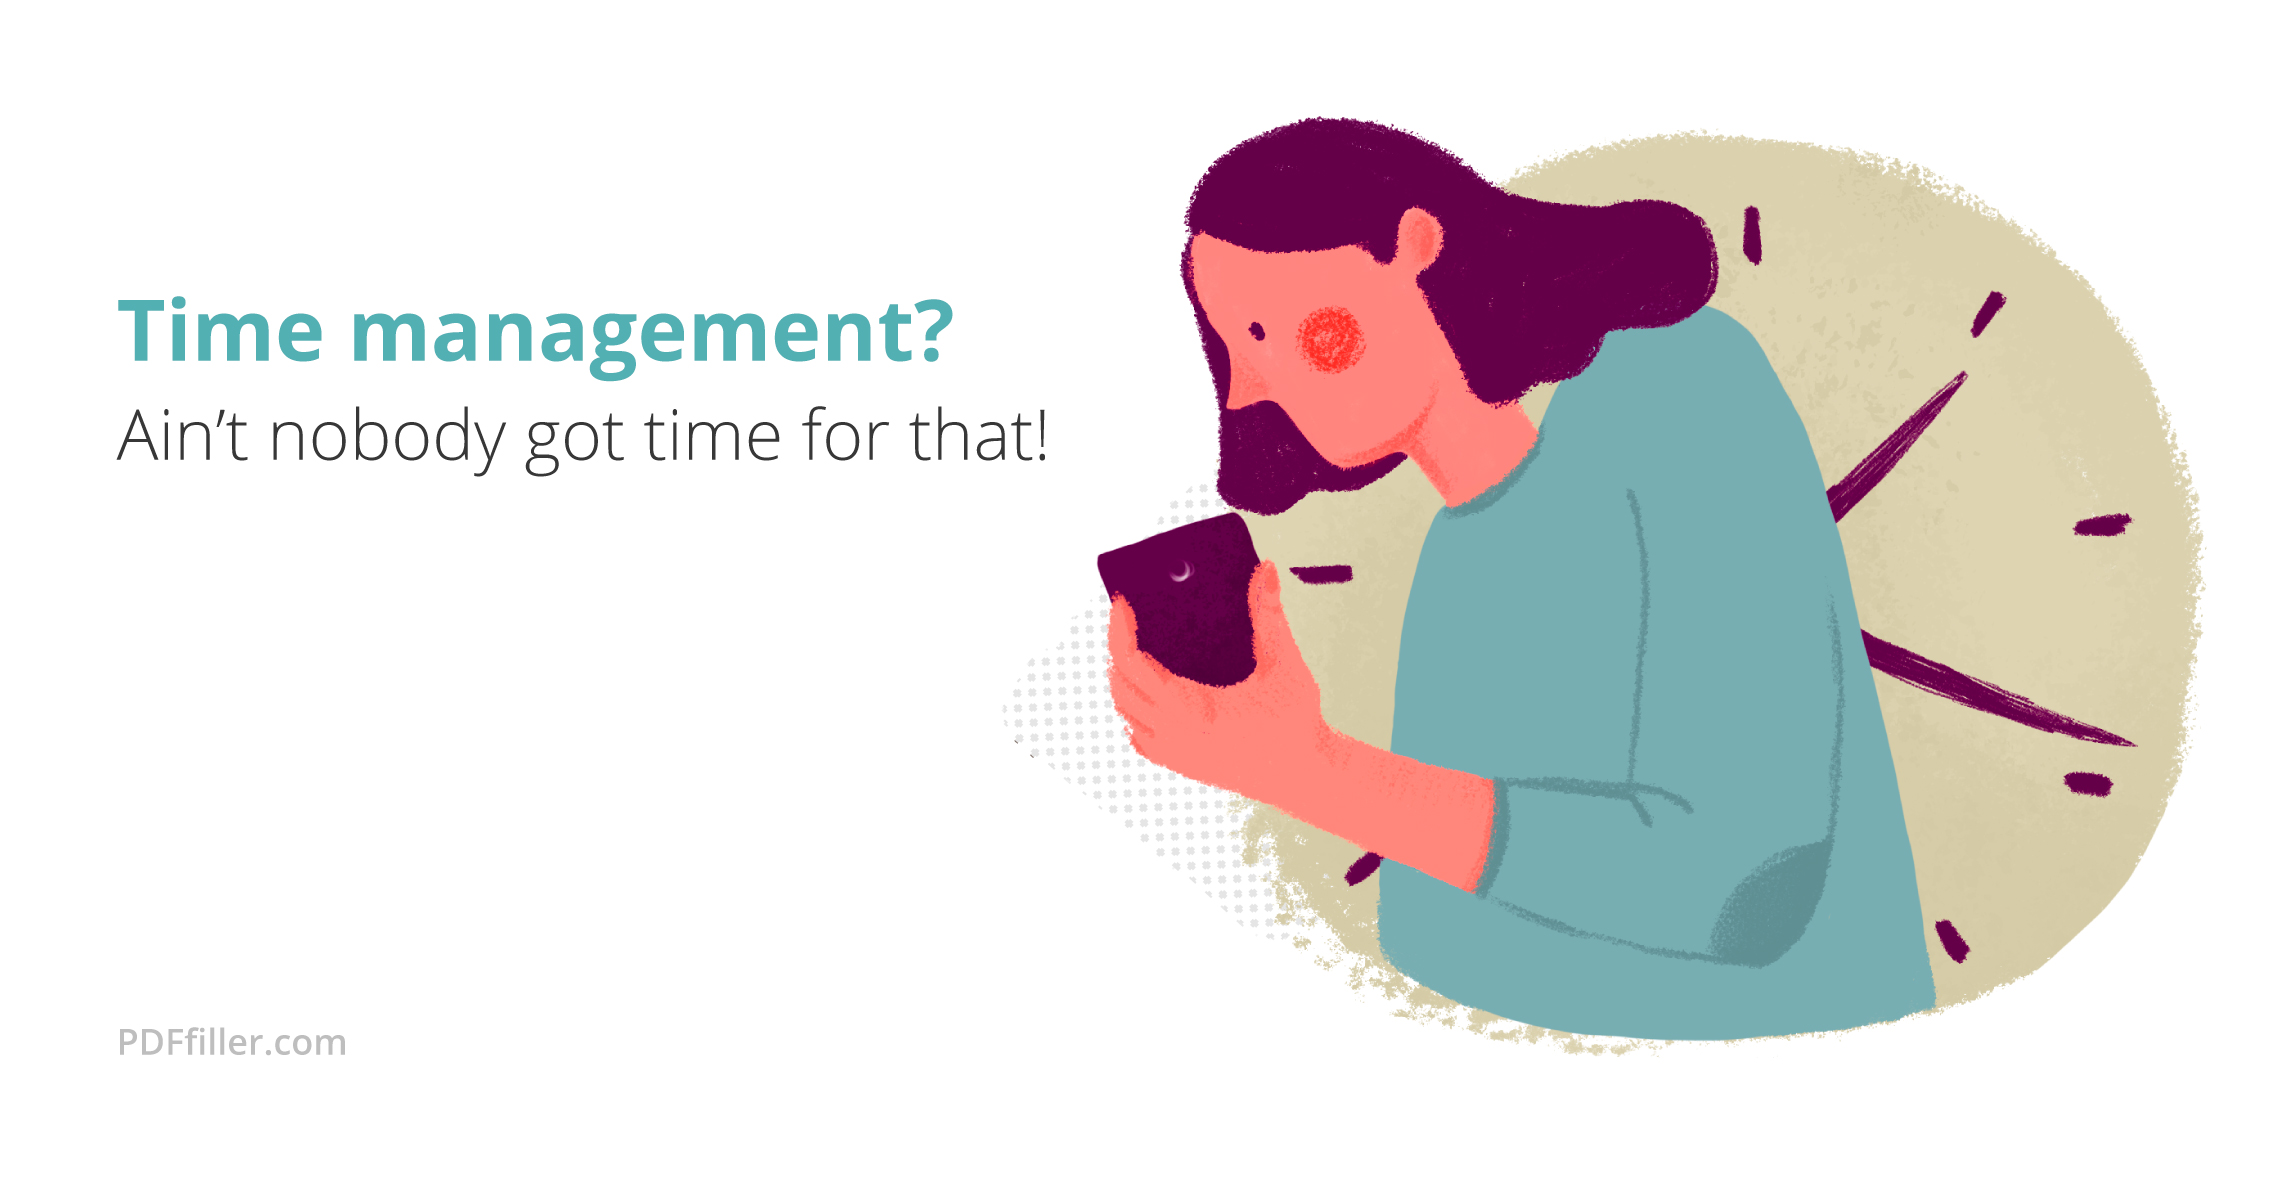 Time-management tools